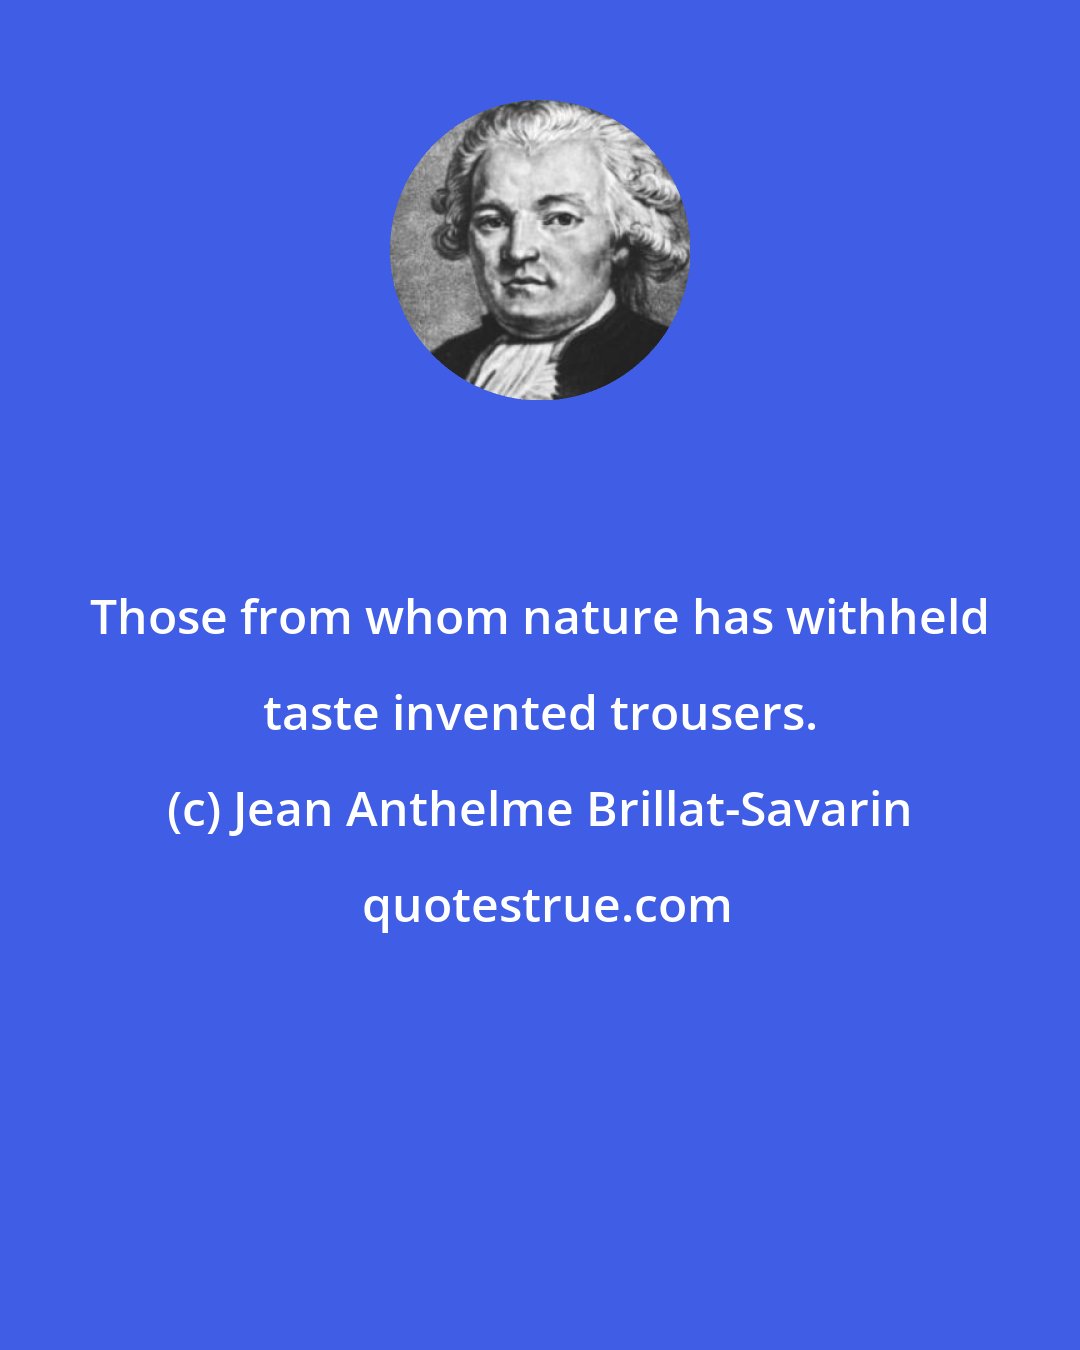 Jean Anthelme Brillat-Savarin: Those from whom nature has withheld taste invented trousers.